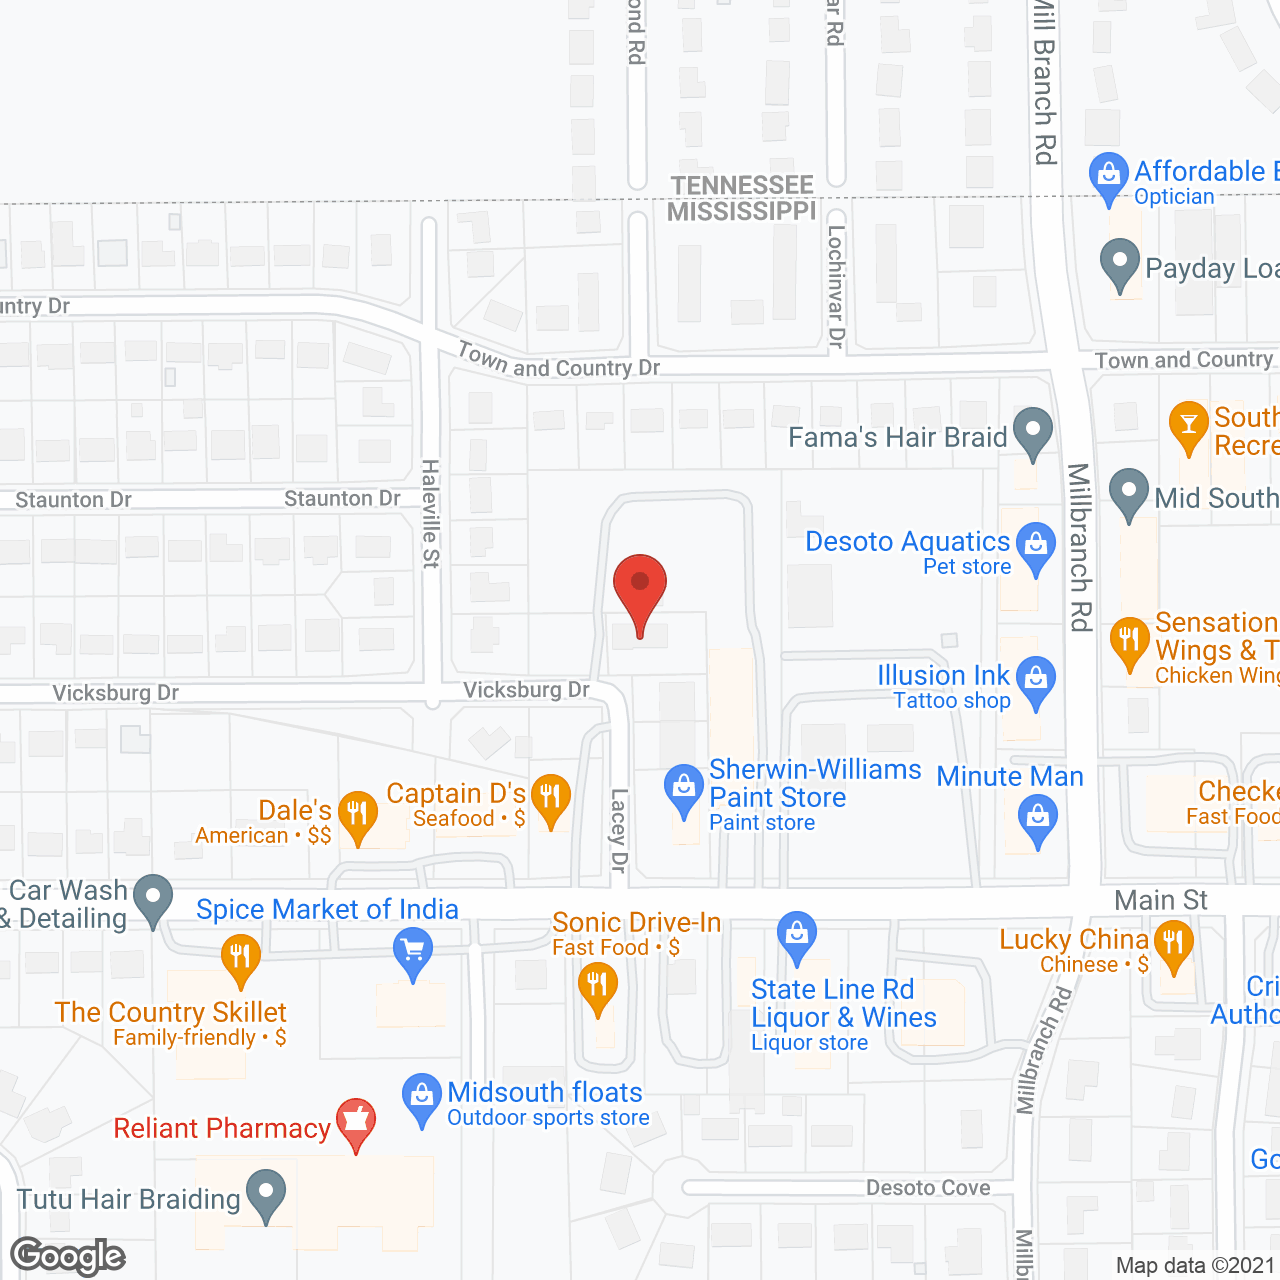 Affordable Senior Care in google map